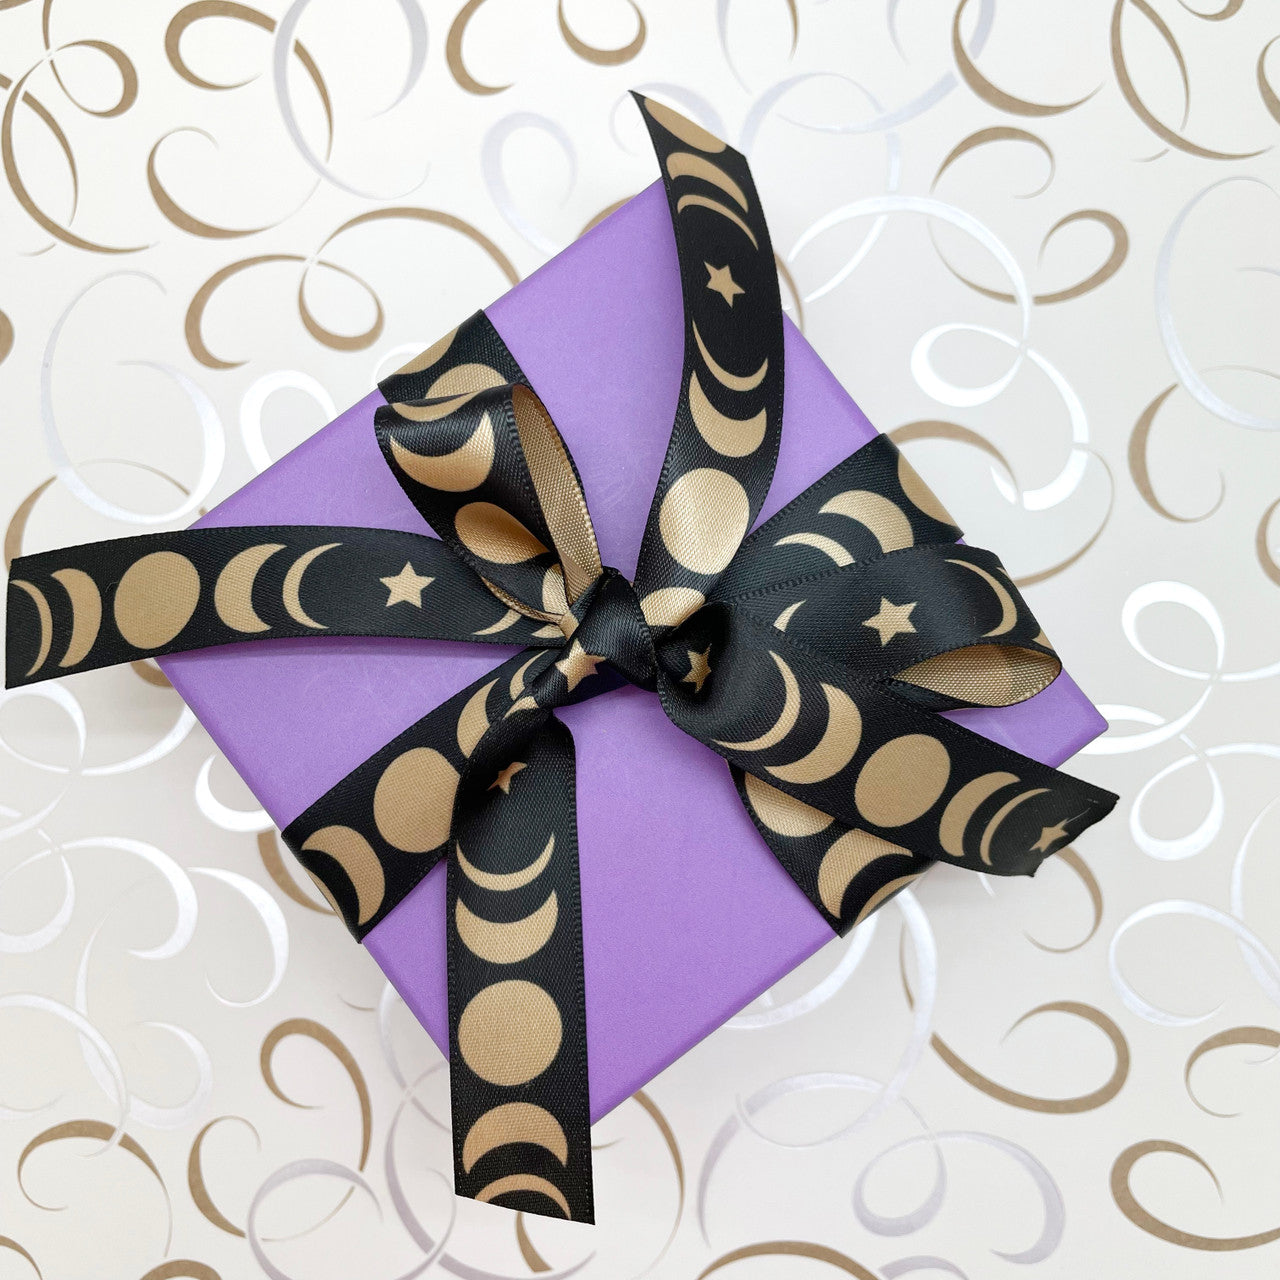 Moon phase ribbon tied on a purple package makes for a pretty gift for any celestial  themed celebration!